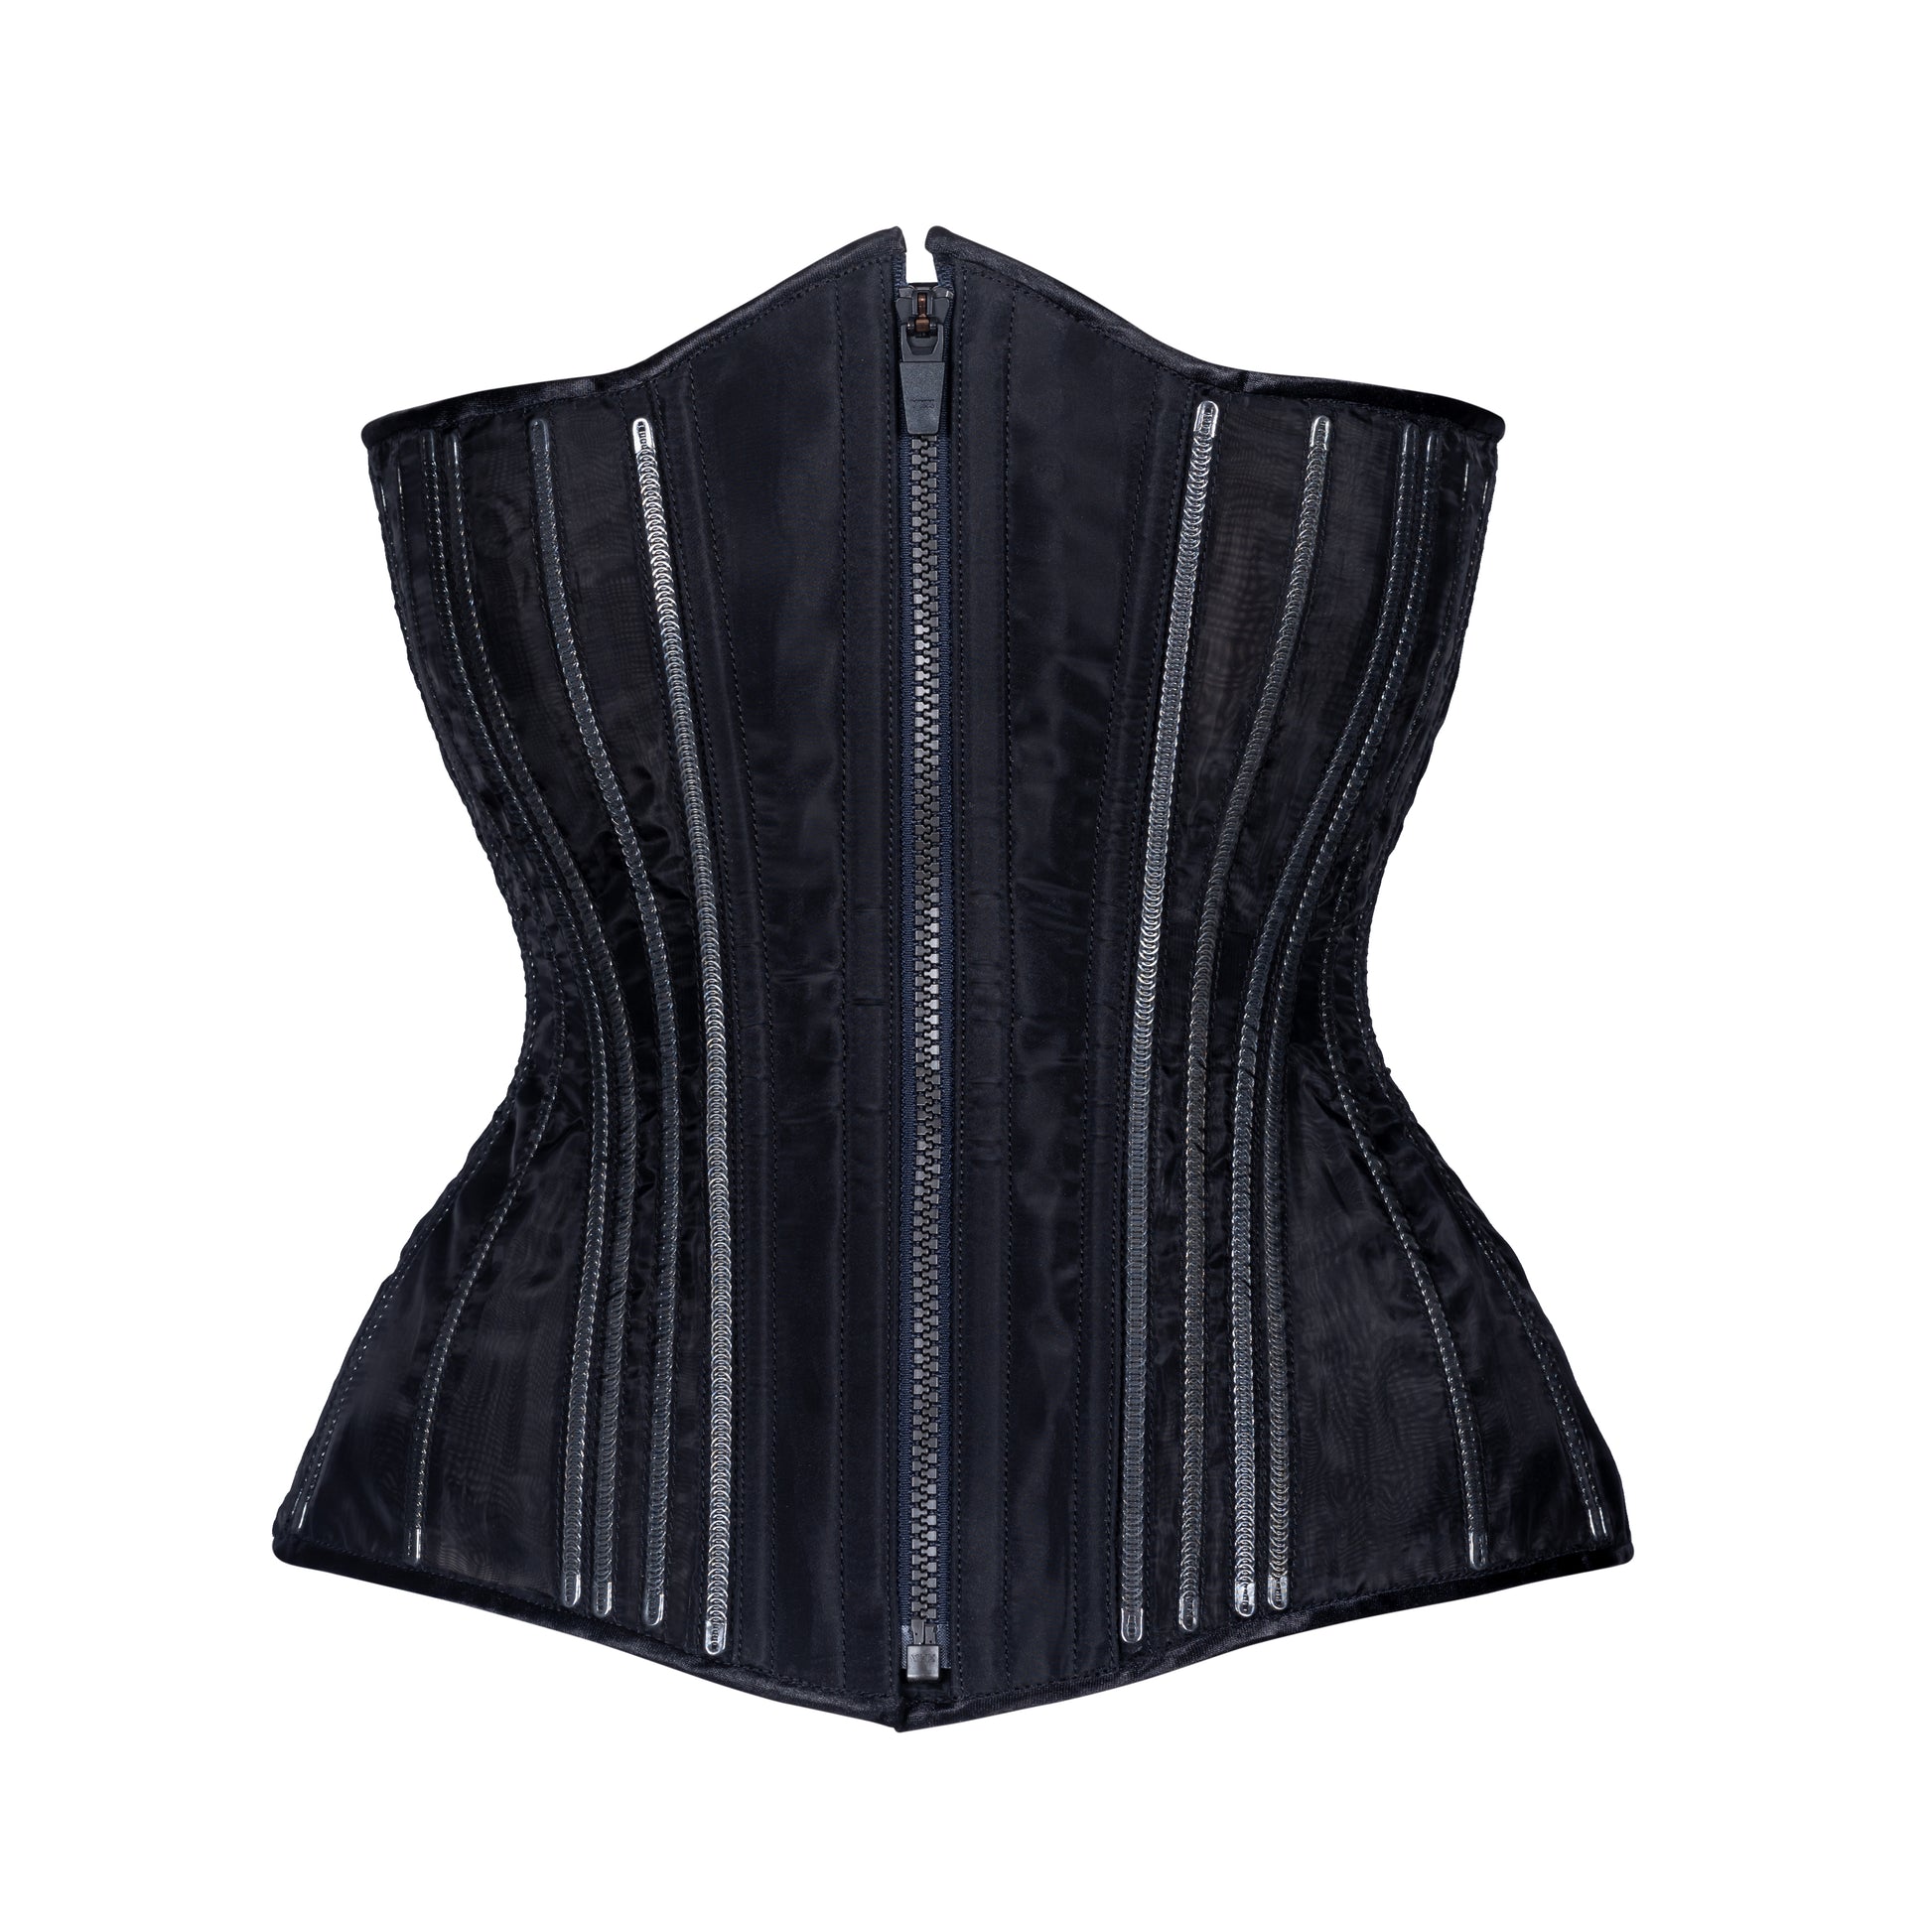 Strong Steel Boned Corsets for over 4” Waist Reduction - True Corset